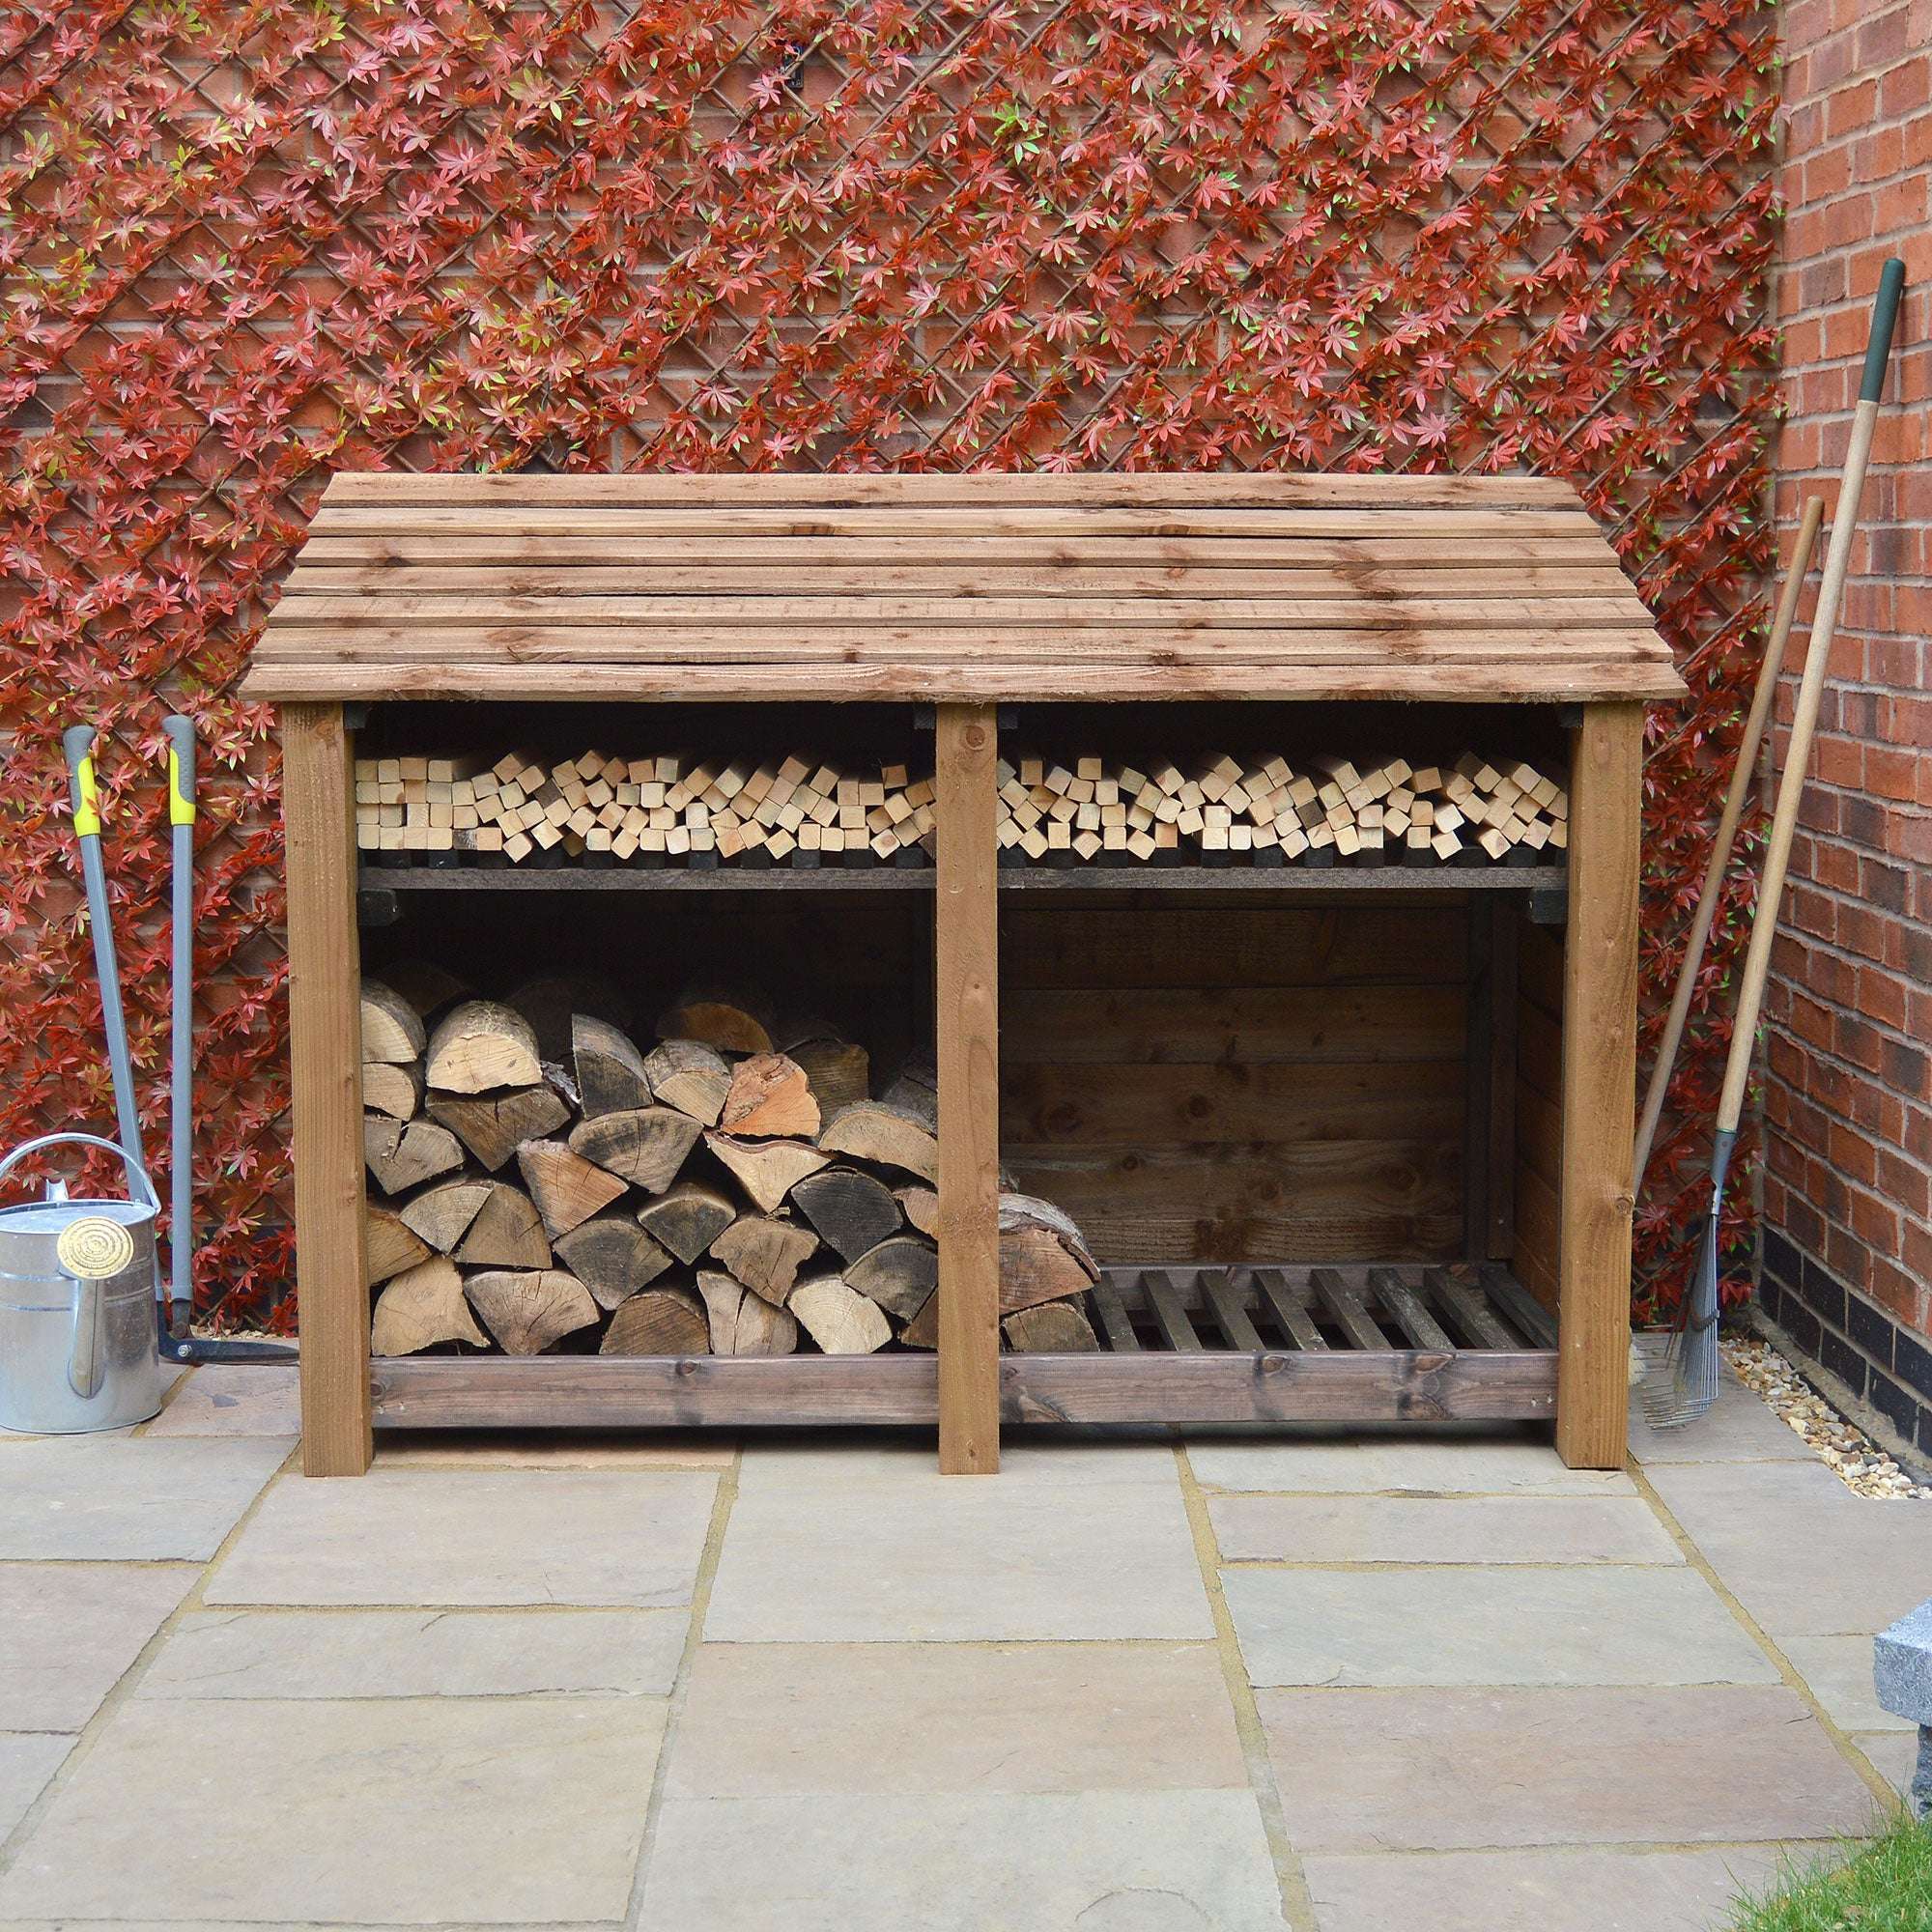 Exceptional Garden:Rutland Country Hambleton Log Store with Kindling Shelf - 4ft